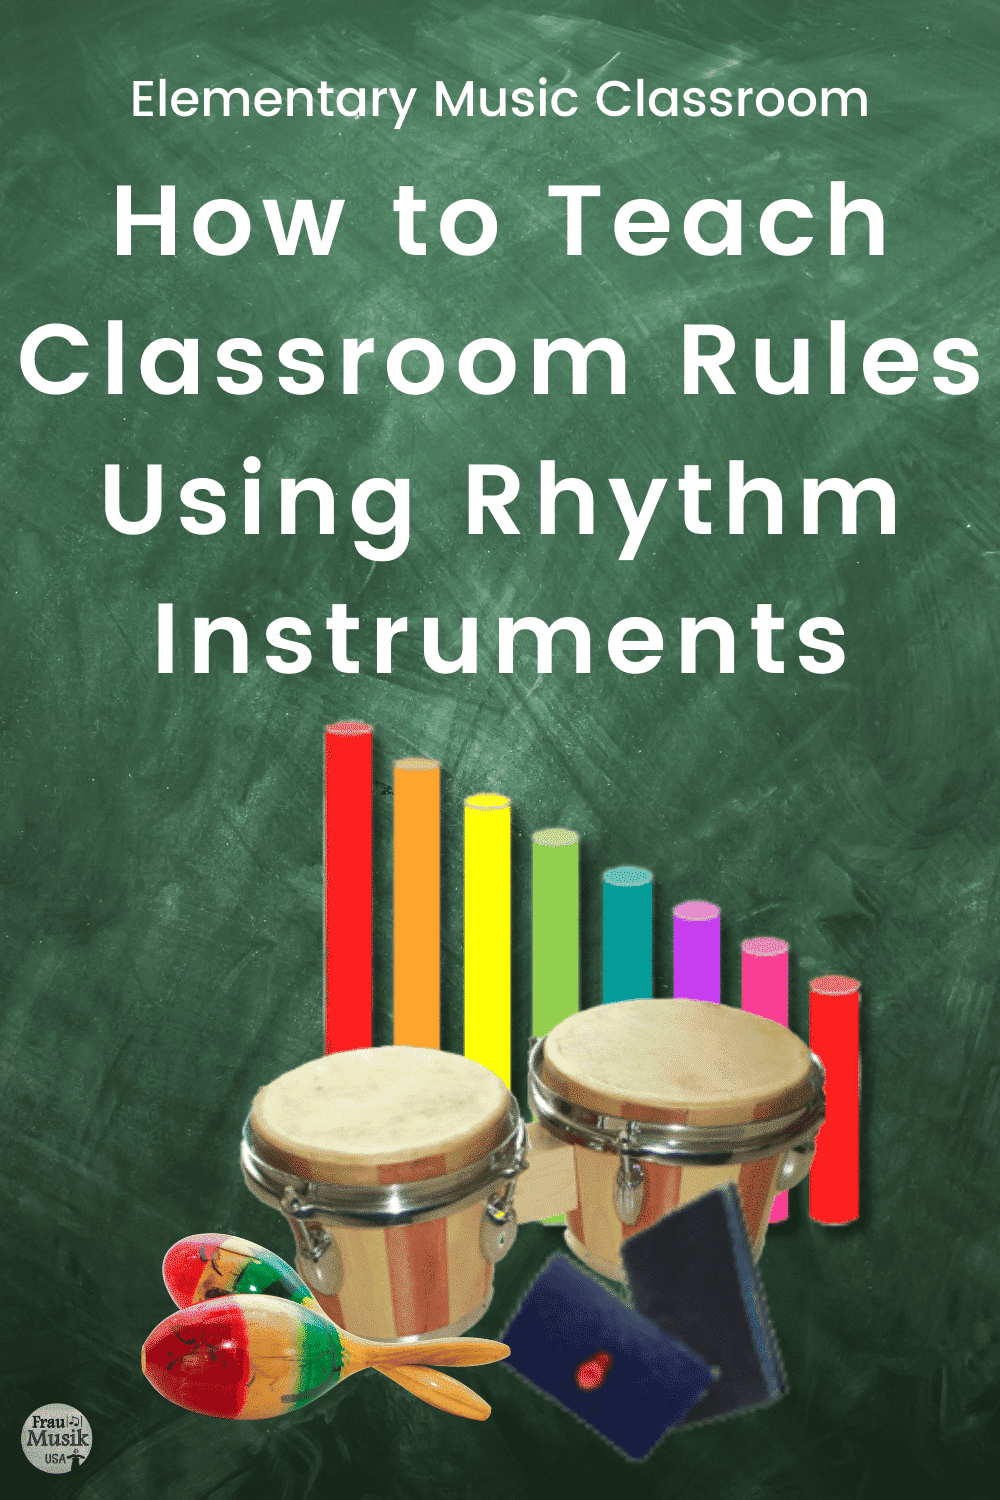 How to Teach Elementary Music Classroom Rules with Orff Rhythm Patterns